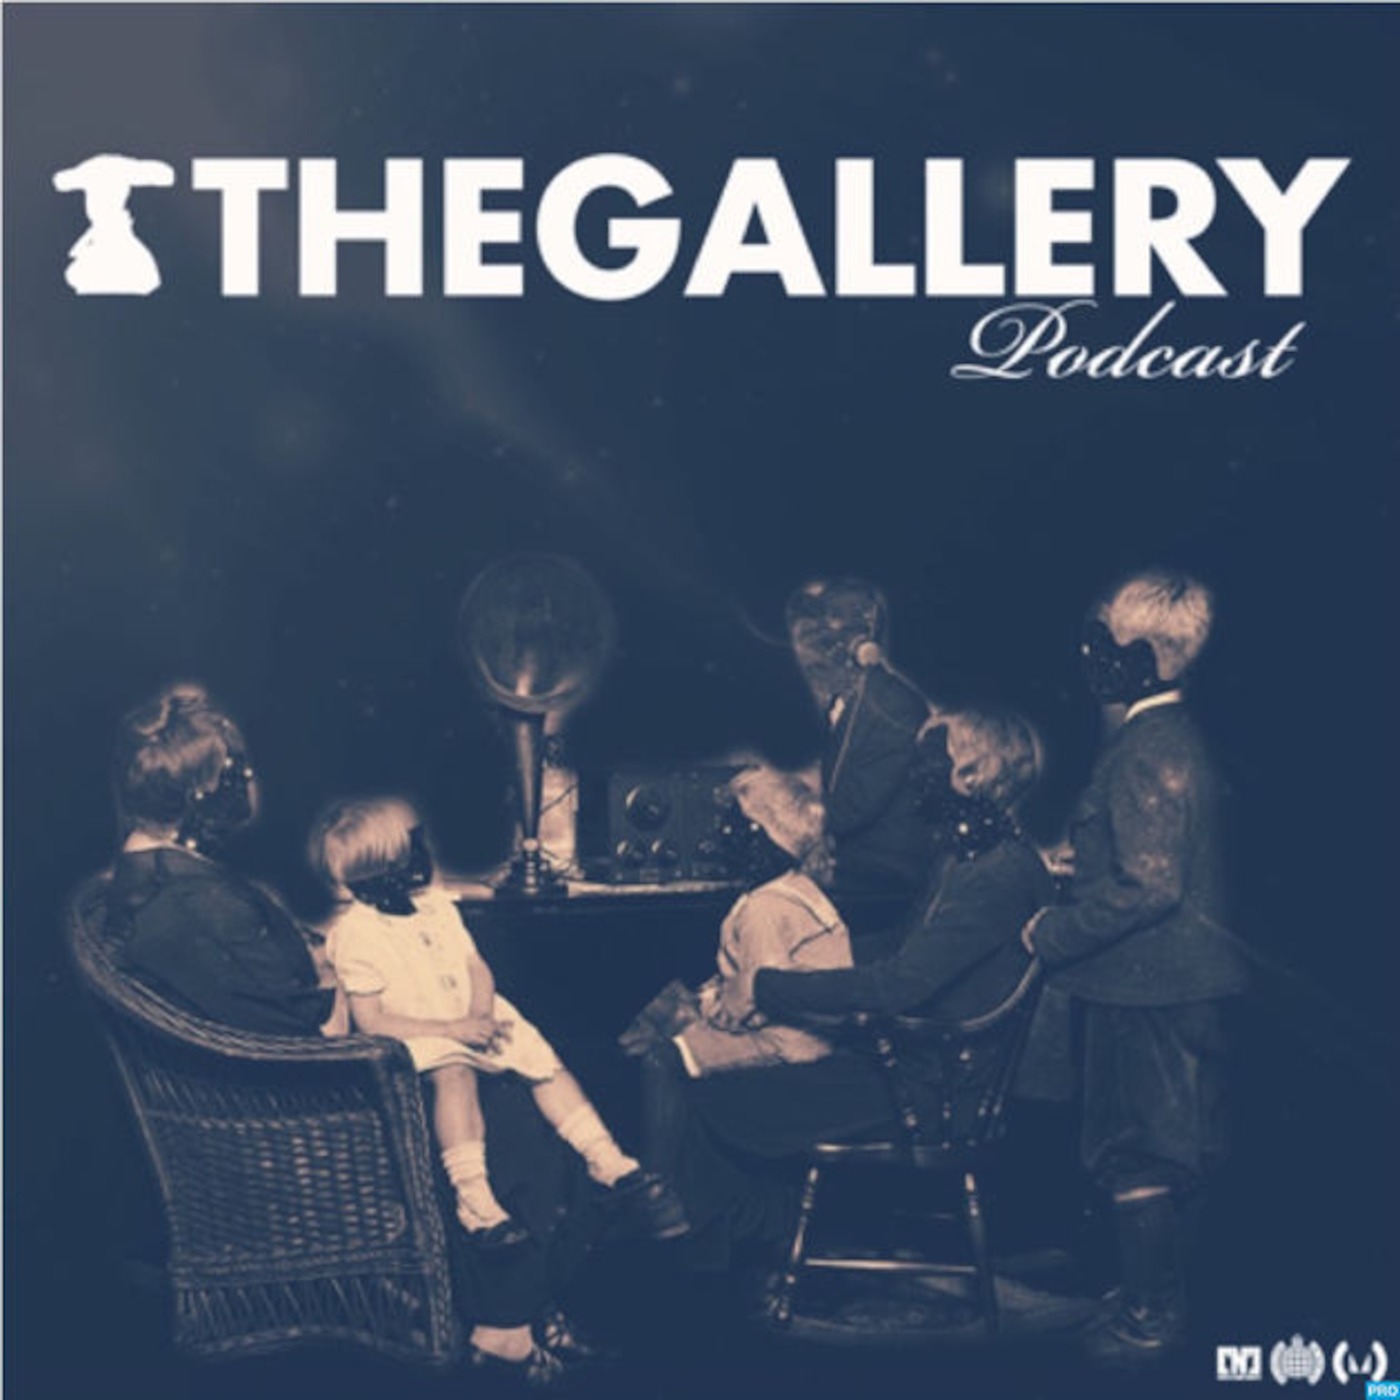 The Gallery Podcast Episode 172 W/ Tristan D ** Coldharbour Special Edition **